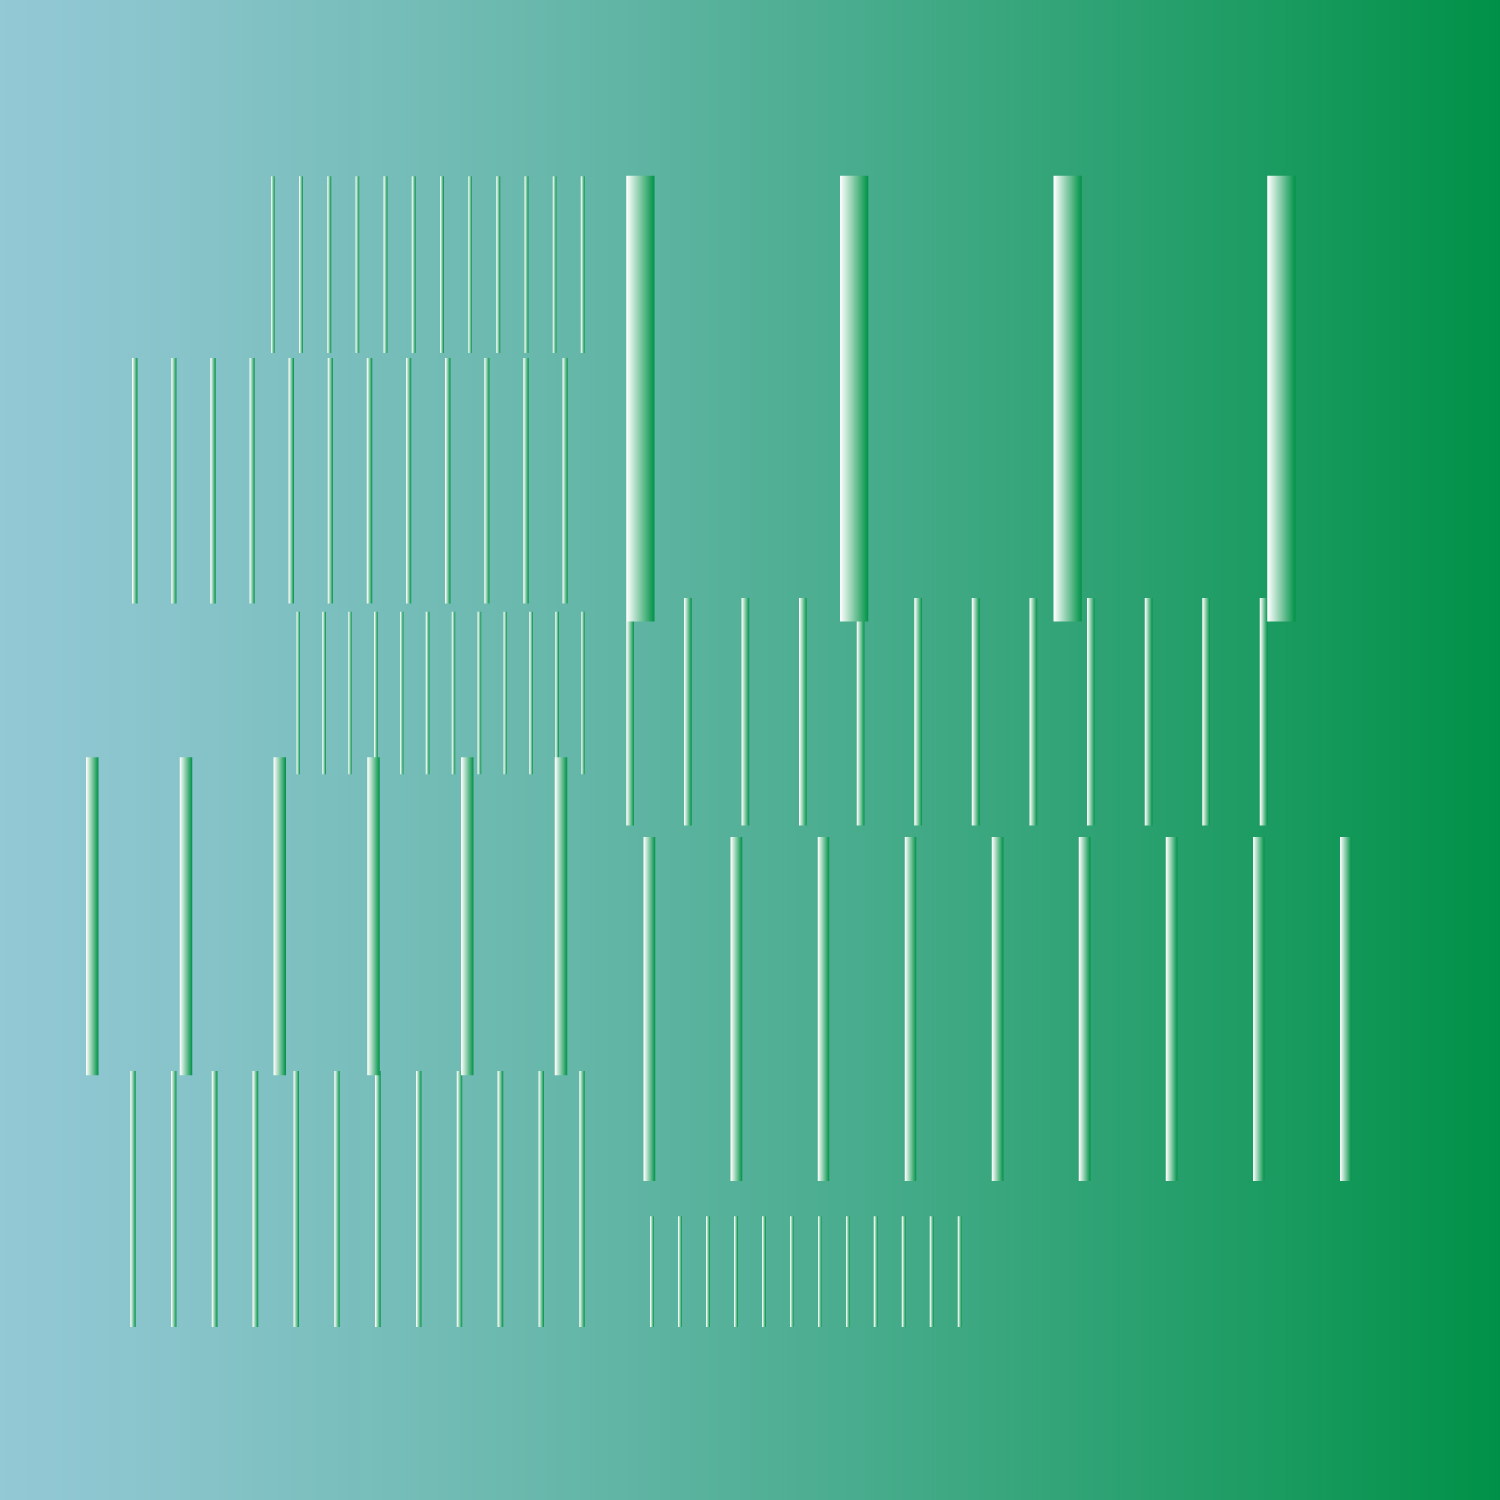 Image of a green color gradient with abstract cylindrical shapes of various colors.